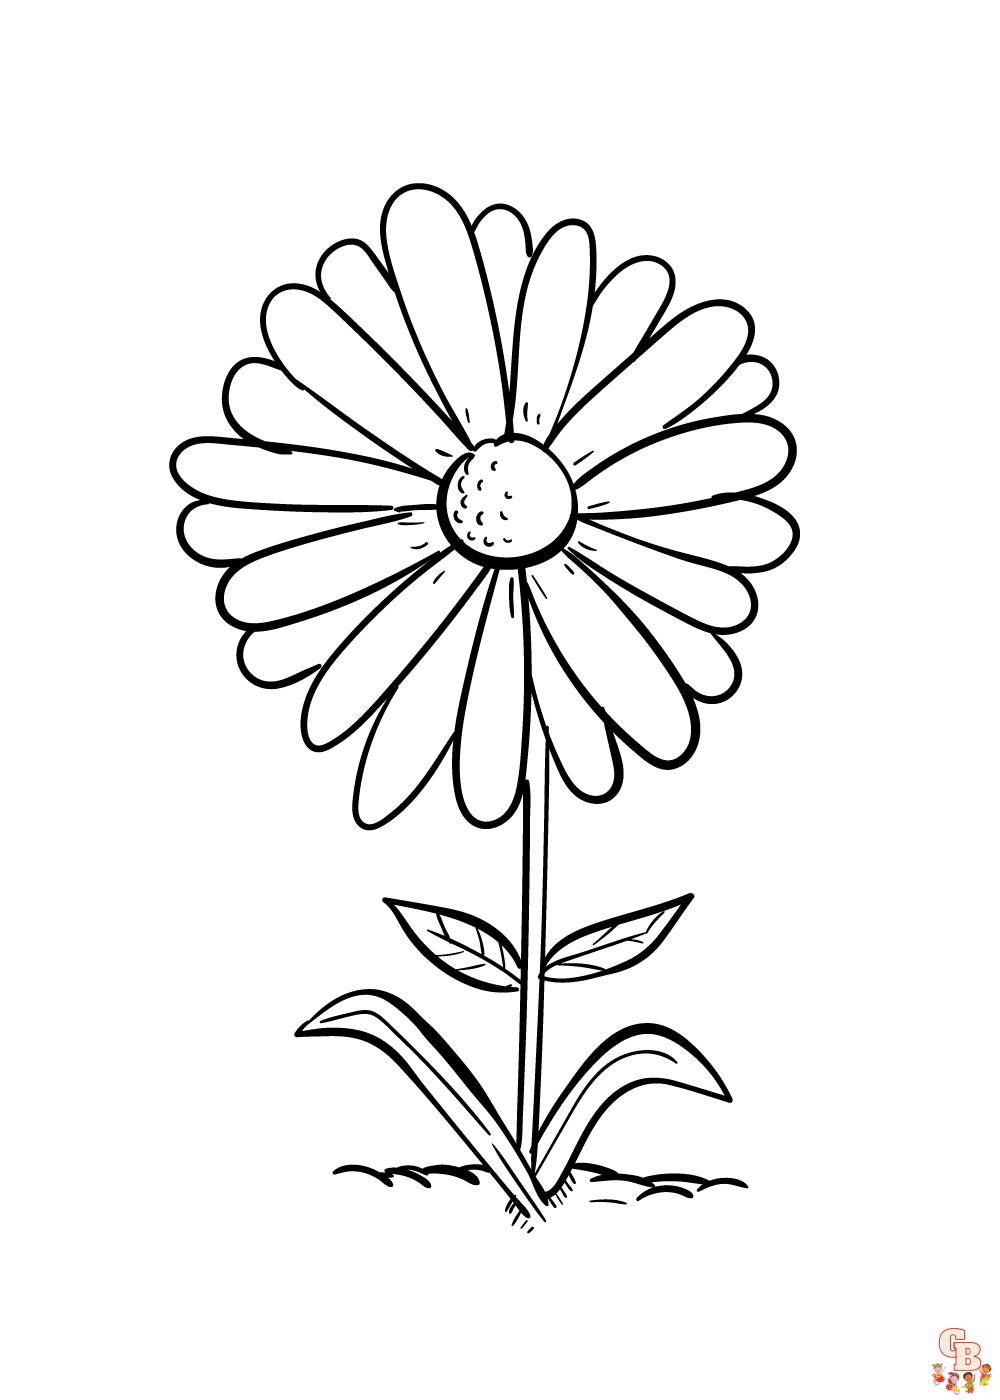 Daisy Coloring Pages 9